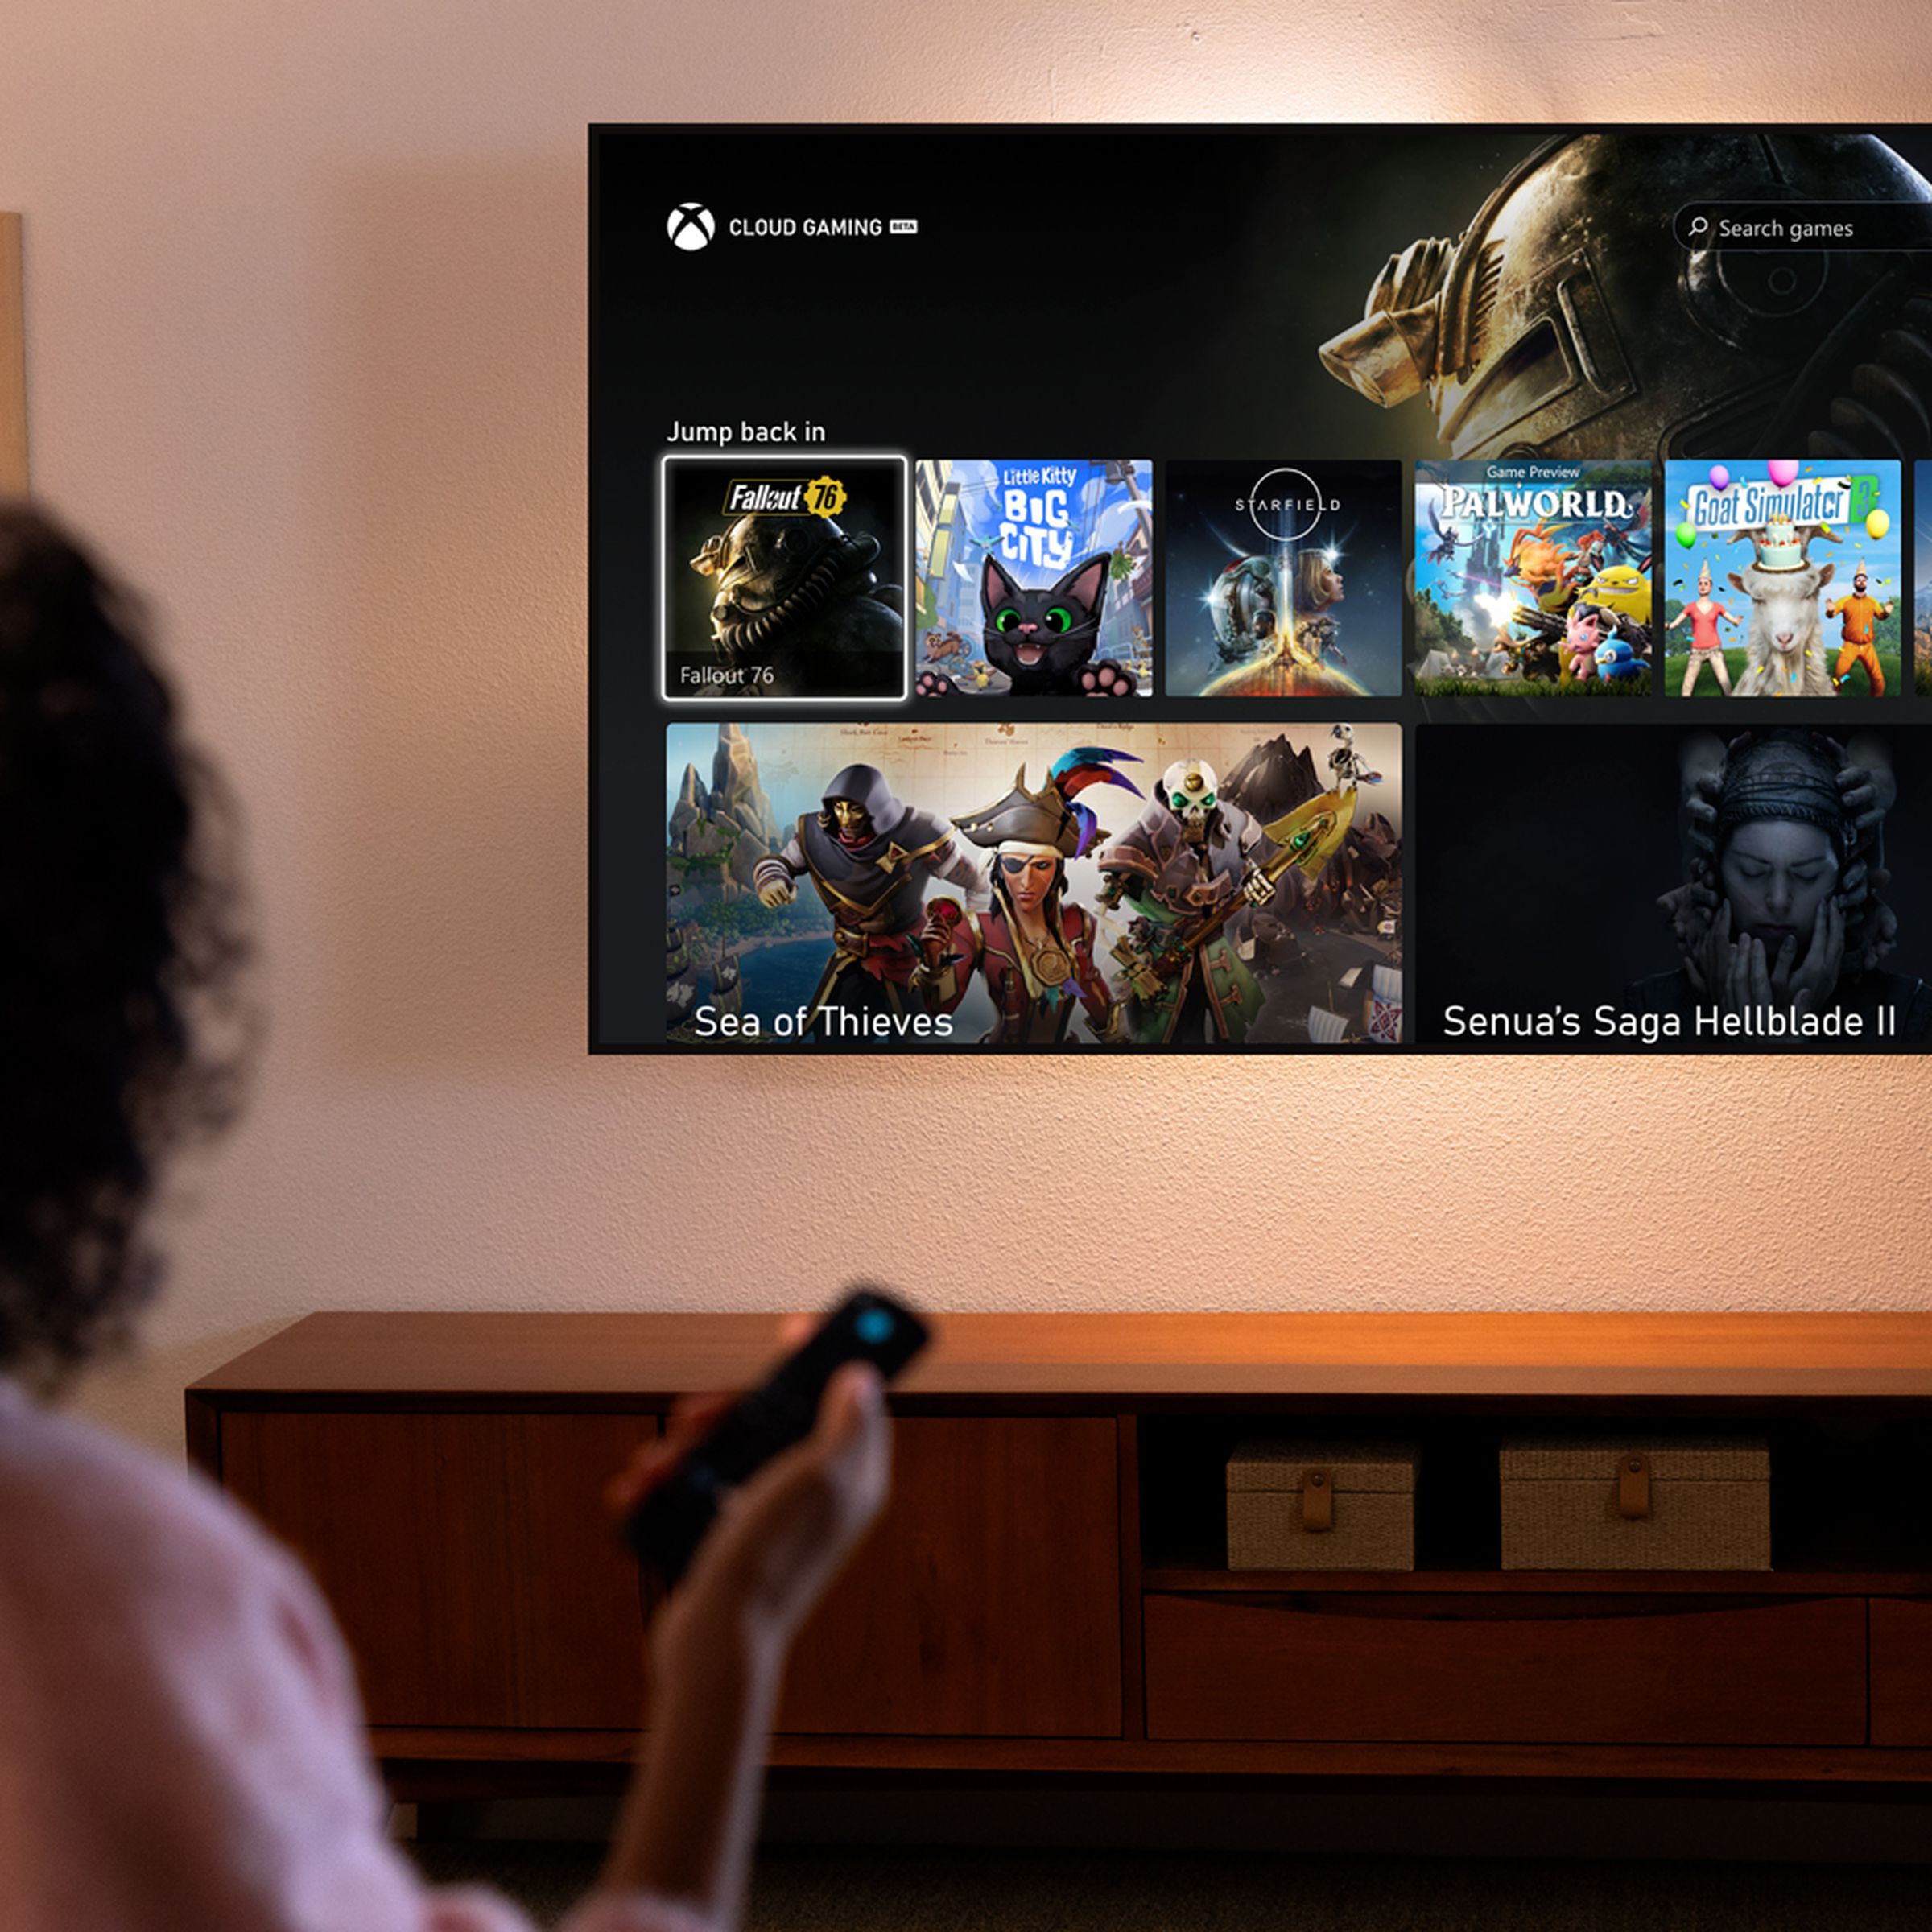 The Xbox TV app on a Fire TV device